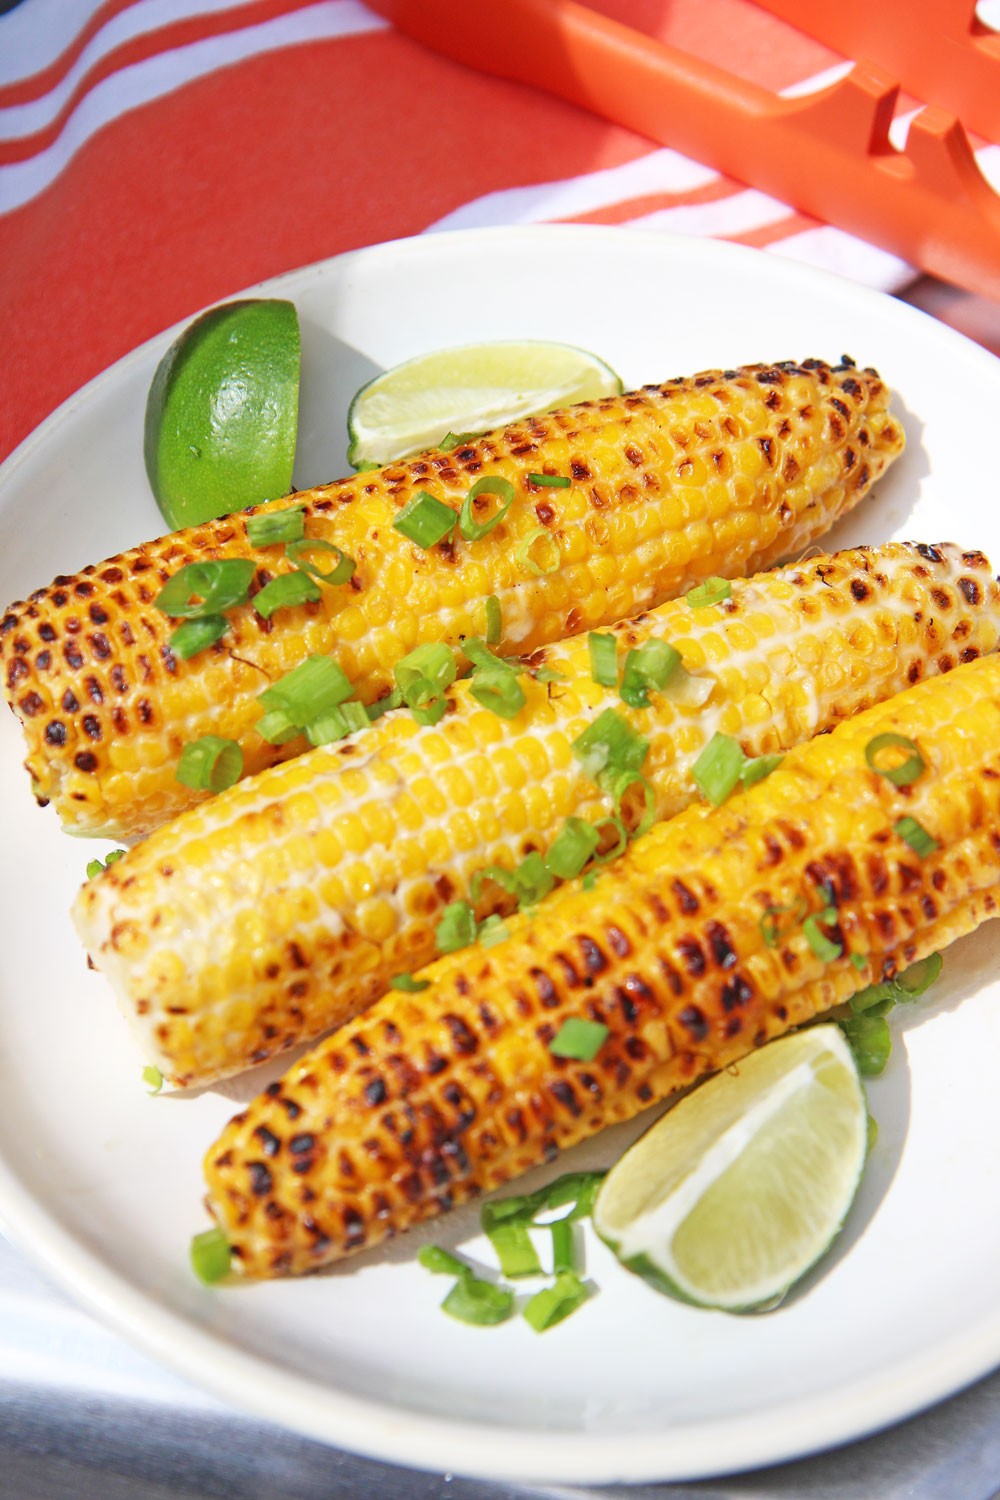 Grilled Cambodian Street Corn Recipe. This is super easy 15 minute grilling side. You make a simple sauce from coconut milk, fish sauce, scallions and sugar. Then you grill and dip till chared on the outside and sweet and juicy on the inside. Happy corn making! www.ChopHappy.com #cornrecipe #grilledcorn